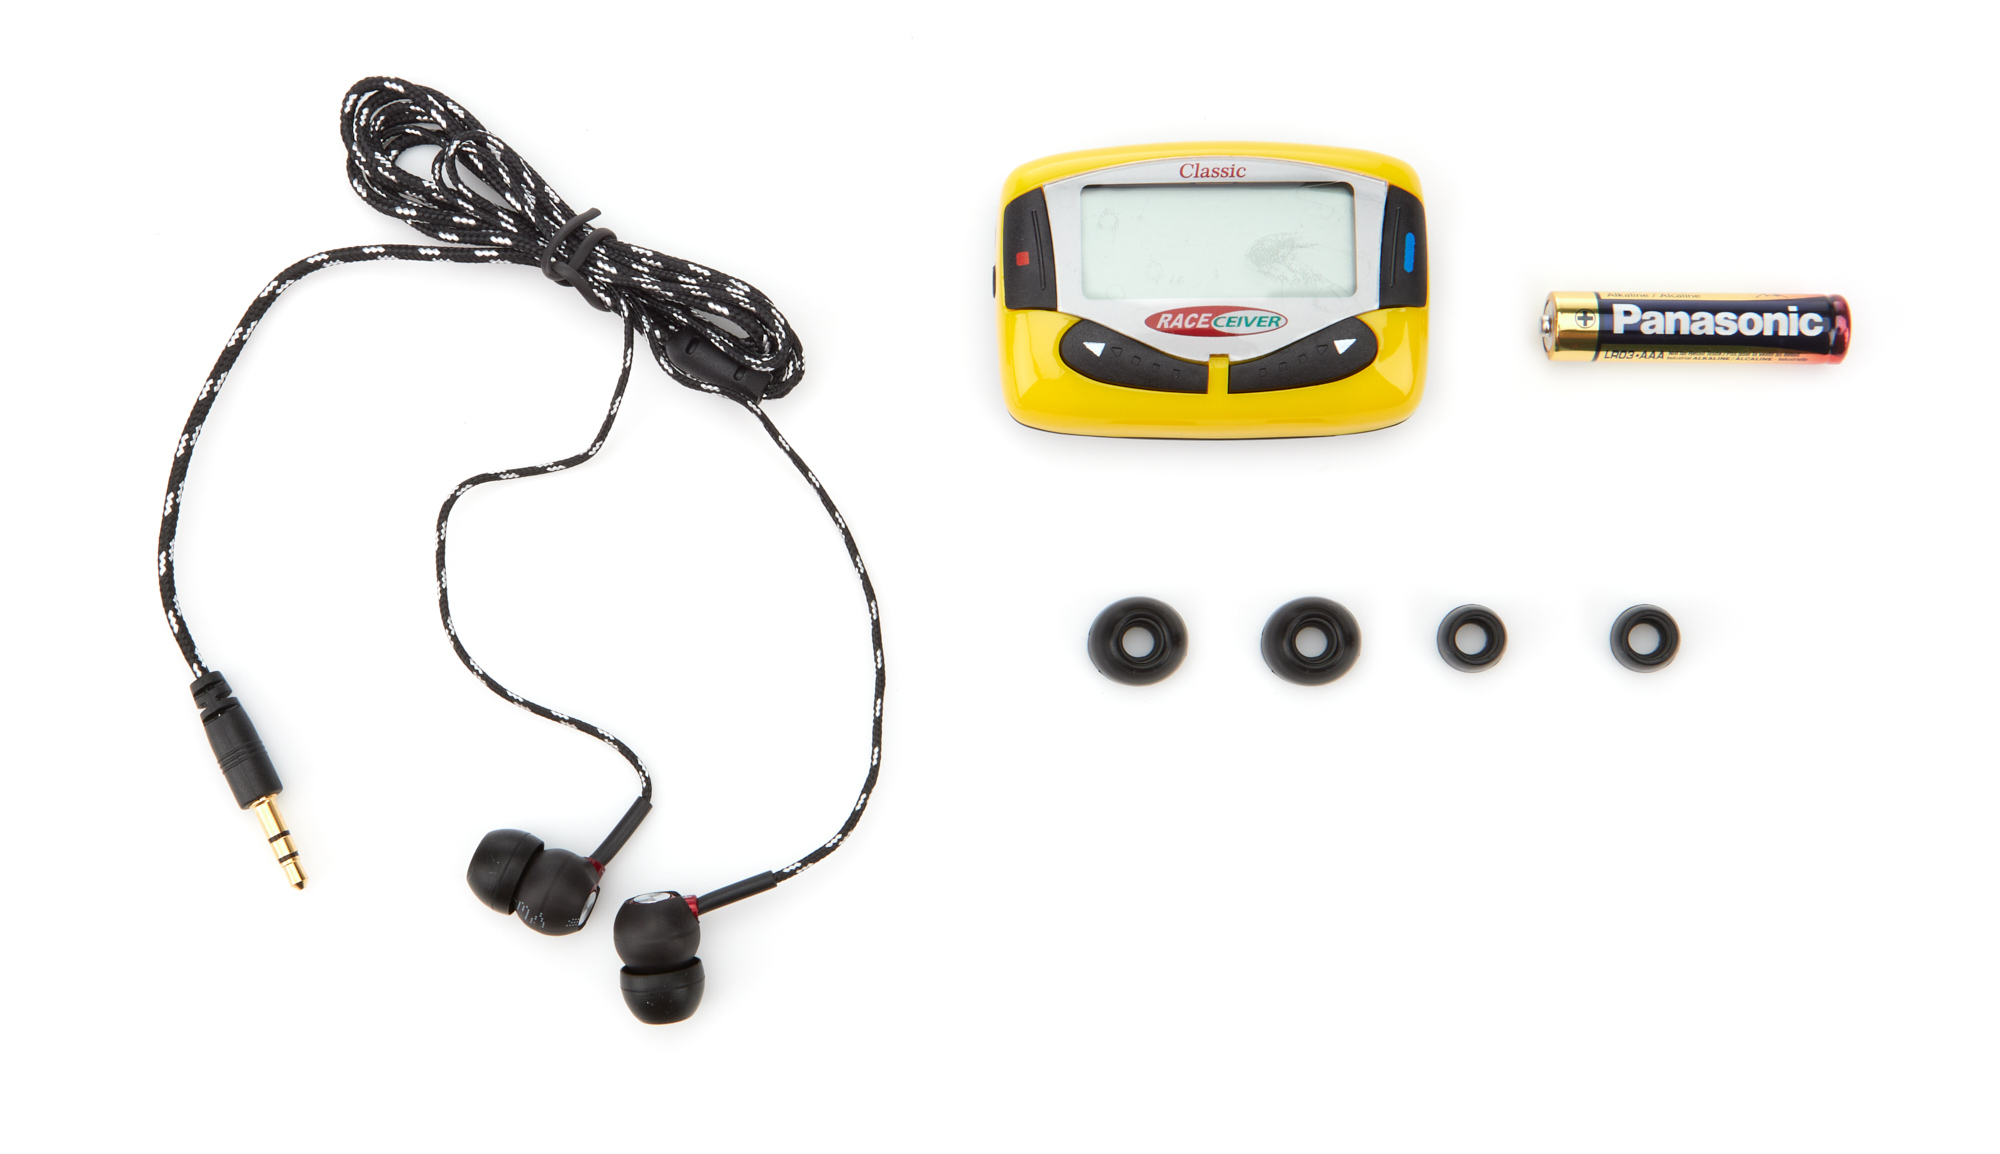 Raceceiver CFUS16REP Radio Receiver, Classic Fusion Plus, LCD Screen, Rookie Headphones / Holster Included, Plastic, Yellow, Each